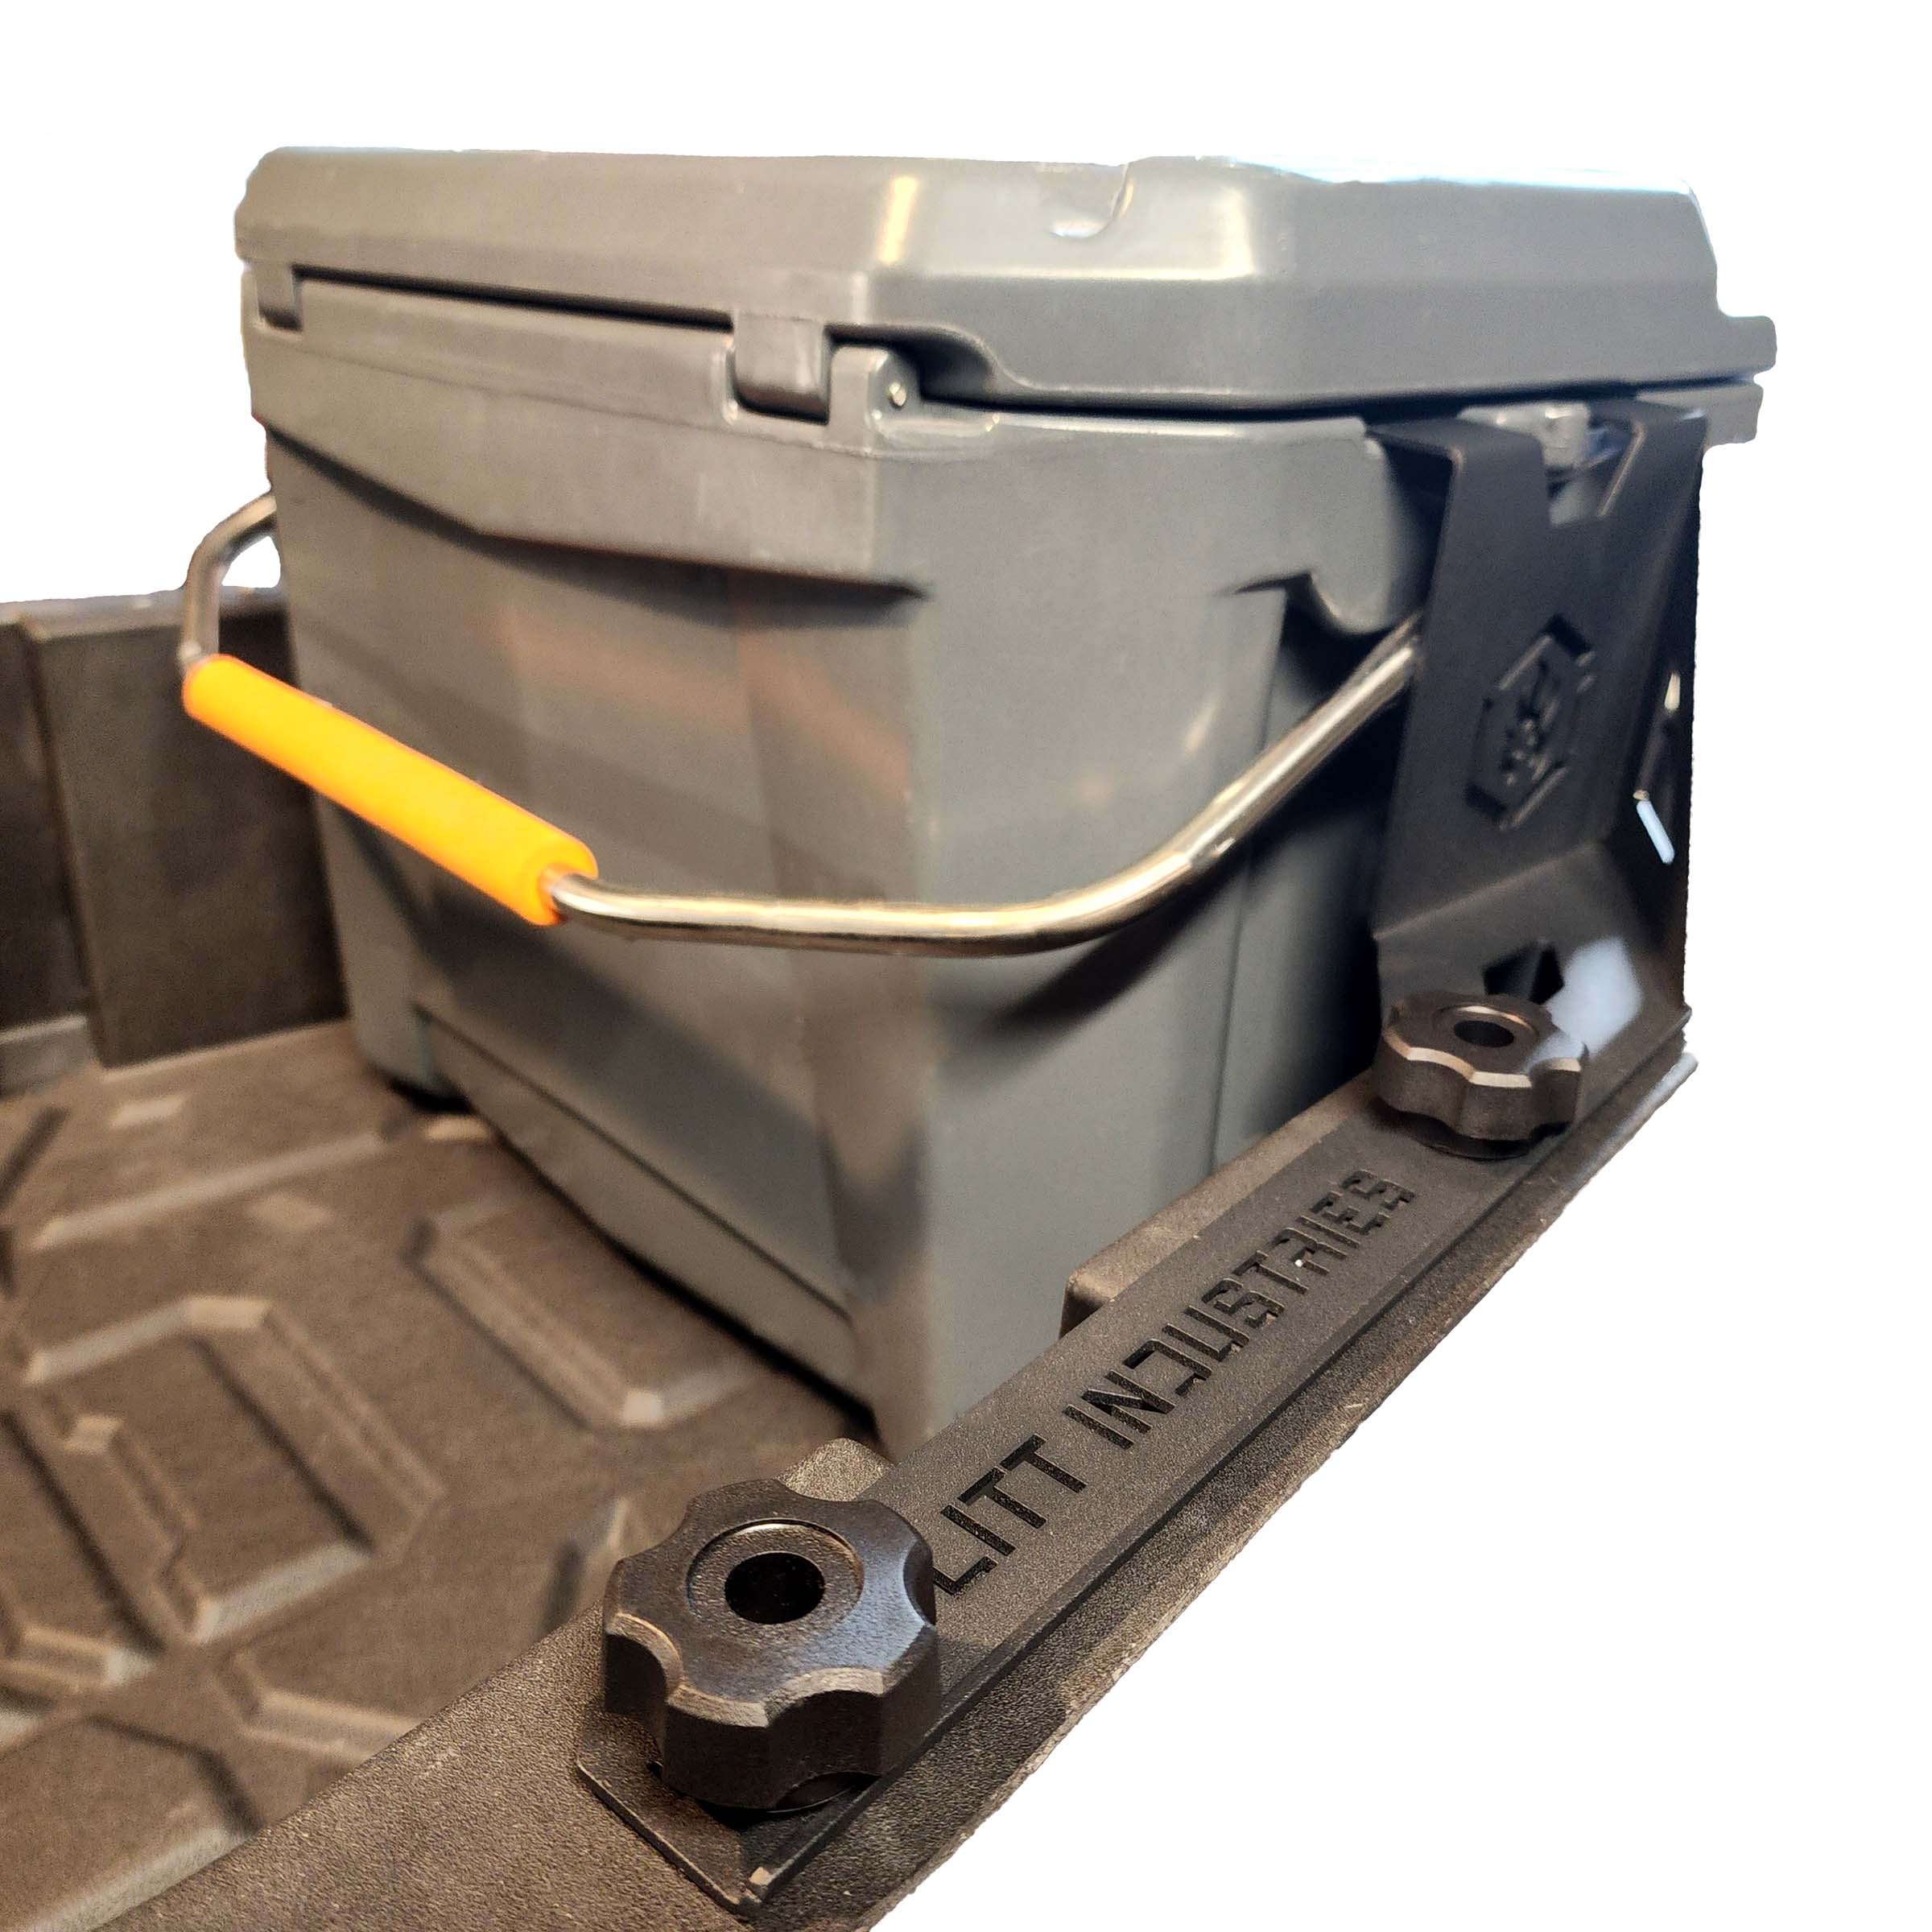 Litt Industries Ozark 26qt Cooler Mount for Polaris RZR PRO R Brackets to hold your cooler in place